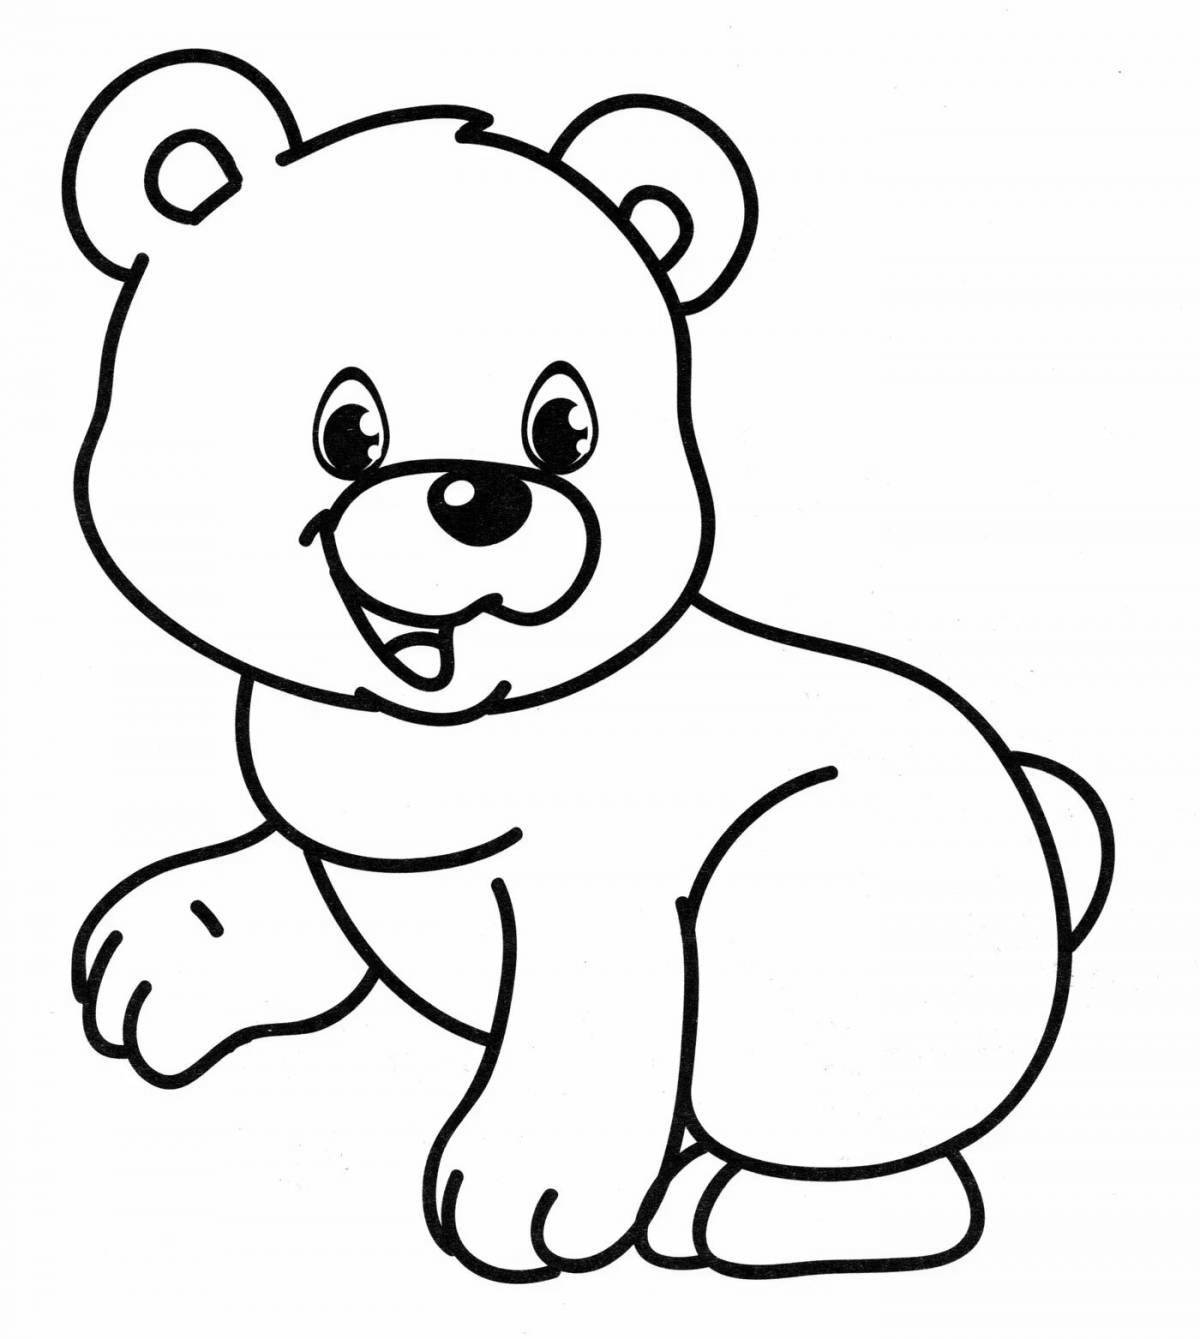 Coloring page of a sociable teddy bear